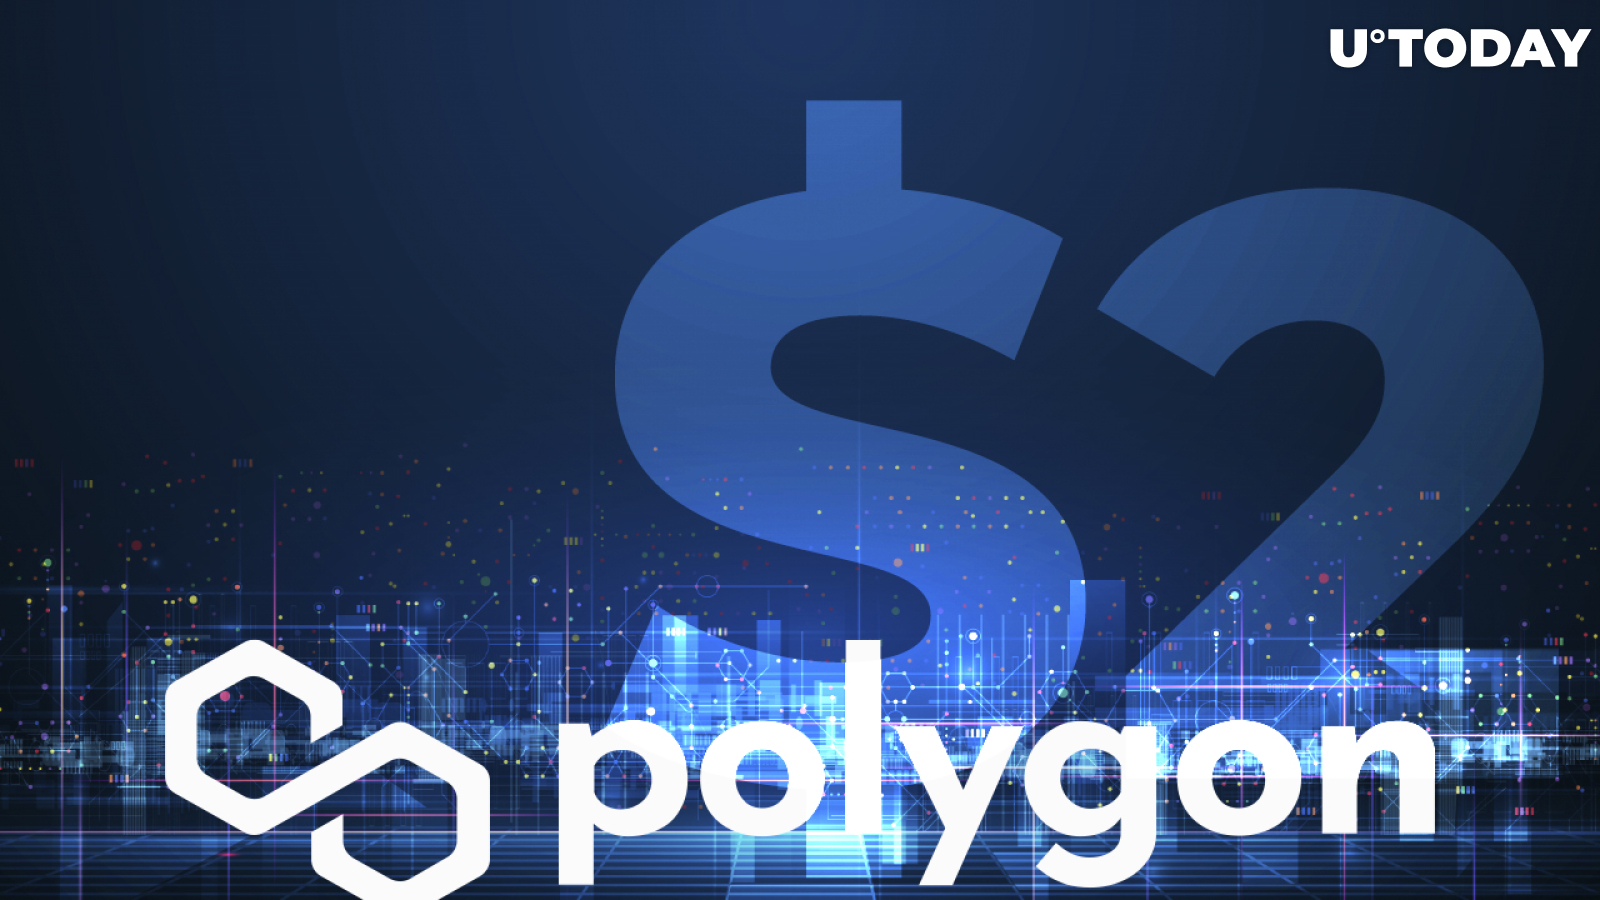 Polygon MATIC Reaches $2 Following 25% Price Rally